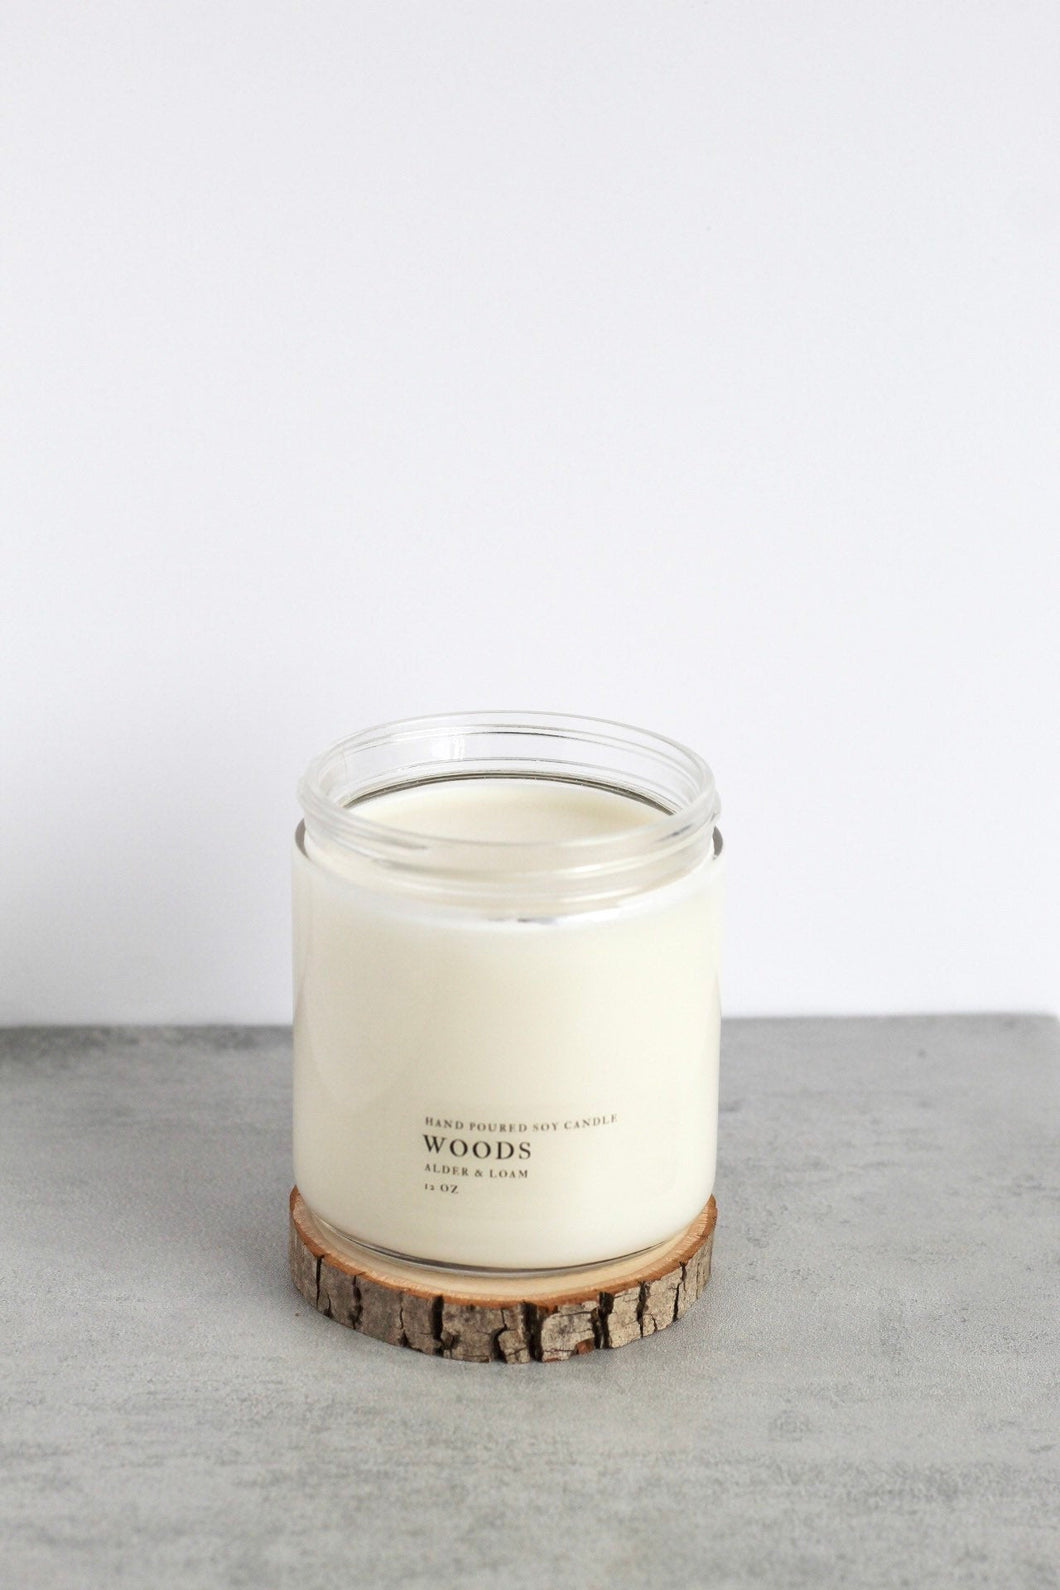 Woods Double Wick Soy Candle, Hand Poured, Natural, Eco Friendly, Earthy Scent, 12 oz Jar